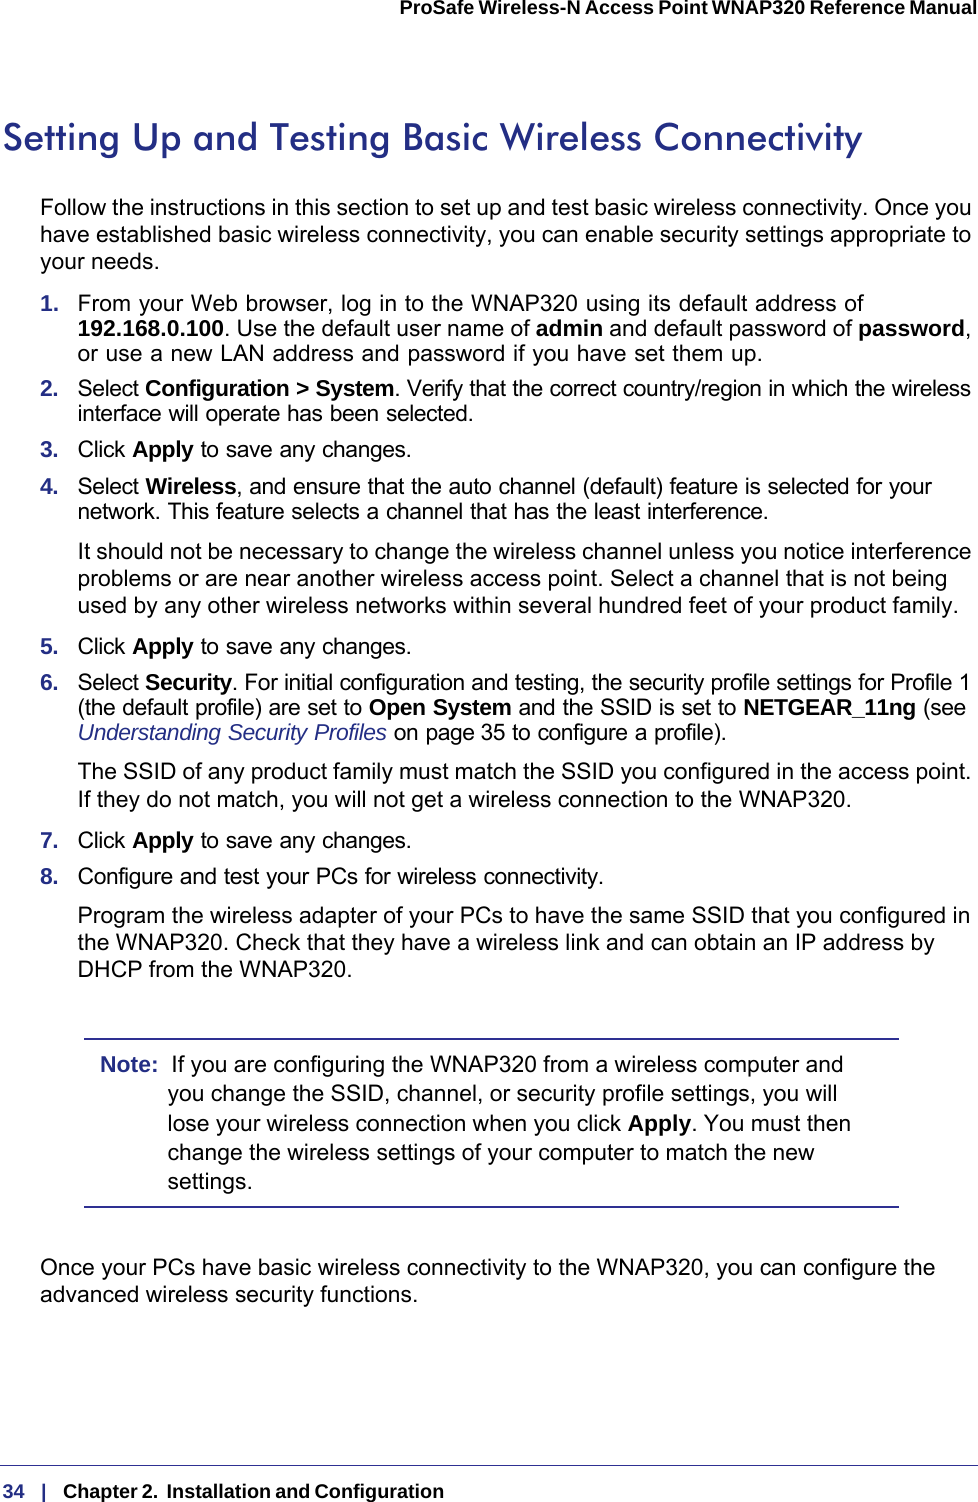 34   |   Chapter 2.  Installation and Configuration  ProSafe Wireless-N Access Point WNAP320 Reference Manual Setting Up and Testing Basic Wireless ConnectivityFollow the instructions in this section to set up and test basic wireless connectivity. Once you have established basic wireless connectivity, you can enable security settings appropriate to your needs.1.  From your Web browser, log in to the WNAP320 using its default address of  192.168.0.100. Use the default user name of admin and default password of password, or use a new LAN address and password if you have set them up.2.  Select Configuration &gt; System. Verify that the correct country/region in which the wireless interface will operate has been selected.3.  Click Apply to save any changes.4.  Select Wireless, and ensure that the auto channel (default) feature is selected for your network. This feature selects a channel that has the least interference.It should not be necessary to change the wireless channel unless you notice interference problems or are near another wireless access point. Select a channel that is not being used by any other wireless networks within several hundred feet of your product family. 5.  Click Apply to save any changes.6.  Select Security. For initial configuration and testing, the security profile settings for Profile 1 (the default profile) are set to Open System and the SSID is set to NETGEAR_11ng (see Understanding Security Profiles on page 35 to configure a profile). The SSID of any product family must match the SSID you configured in the access point. If they do not match, you will not get a wireless connection to the WNAP320.7.  Click Apply to save any changes.8.  Configure and test your PCs for wireless connectivity.Program the wireless adapter of your PCs to have the same SSID that you configured in the WNAP320. Check that they have a wireless link and can obtain an IP address by DHCP from the WNAP320.Note:  If you are configuring the WNAP320 from a wireless computer and you change the SSID, channel, or security profile settings, you will lose your wireless connection when you click Apply. You must then change the wireless settings of your computer to match the new settings.Once your PCs have basic wireless connectivity to the WNAP320, you can configure the advanced wireless security functions.